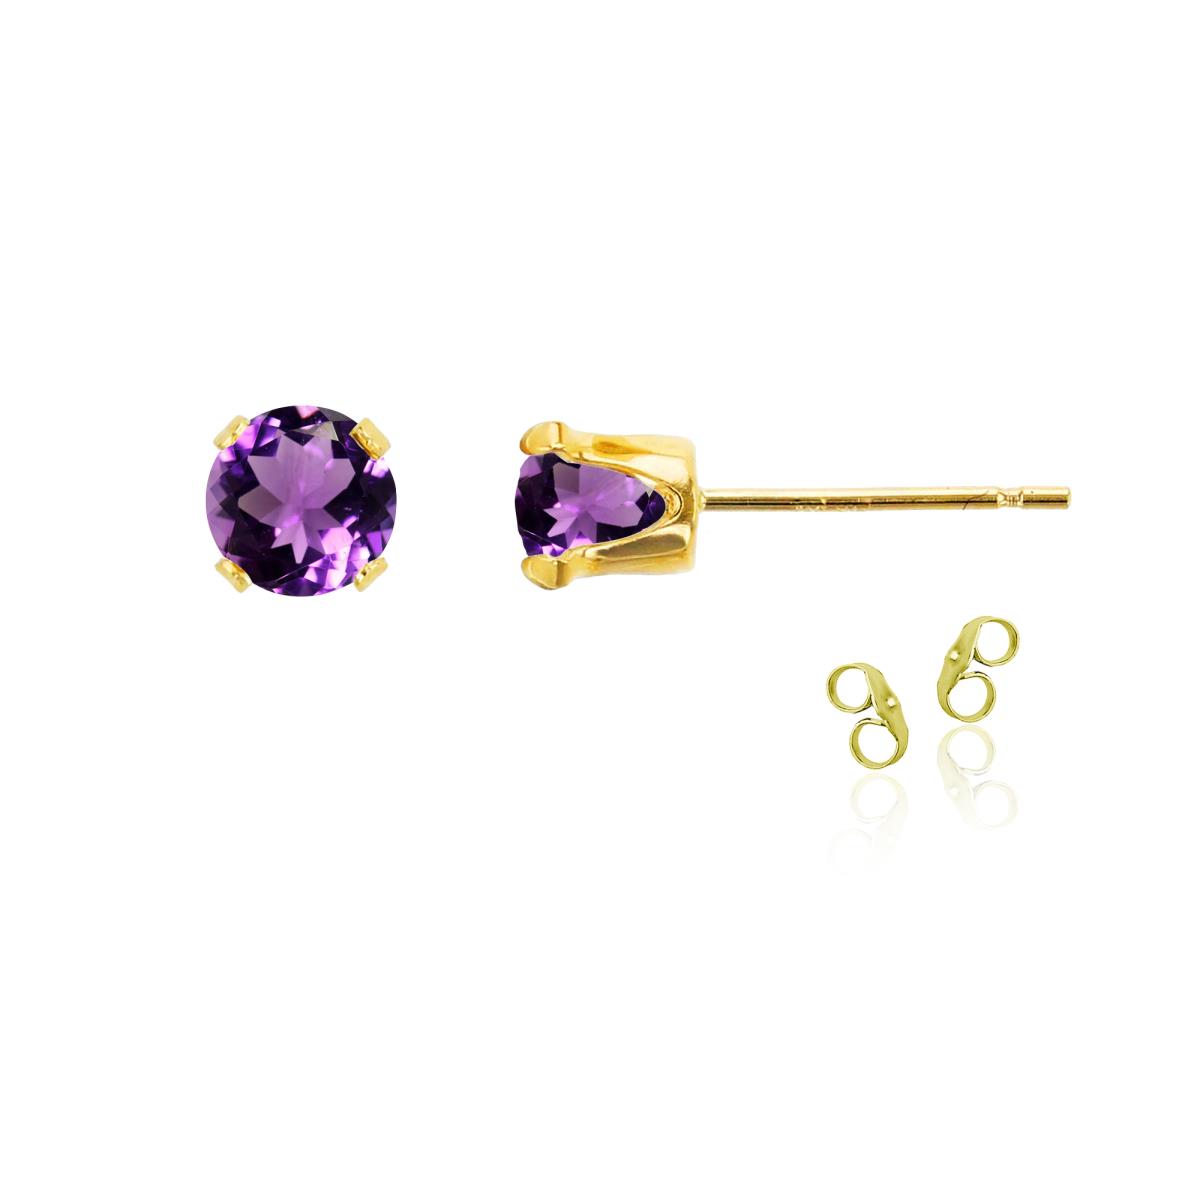 Sterling Silver Yellow 7mm Round Amethyst Stud Earring with Clutch